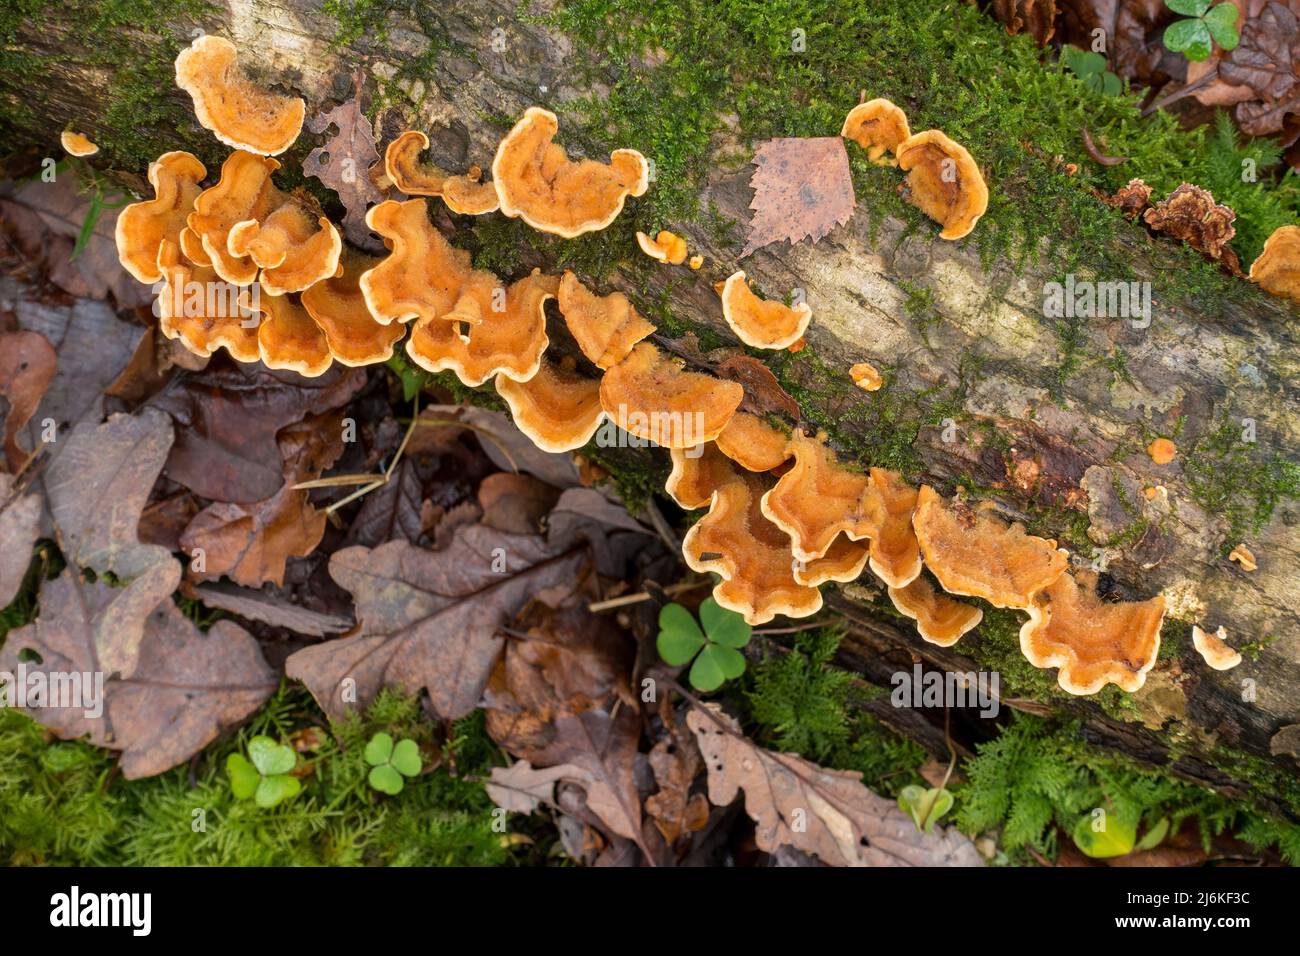 Hairy Curtain Crust (Stereum hirsutum) bracket fungus growing on dead moss covered dead tree trunk, Cumbria, England, UK Stock Photo